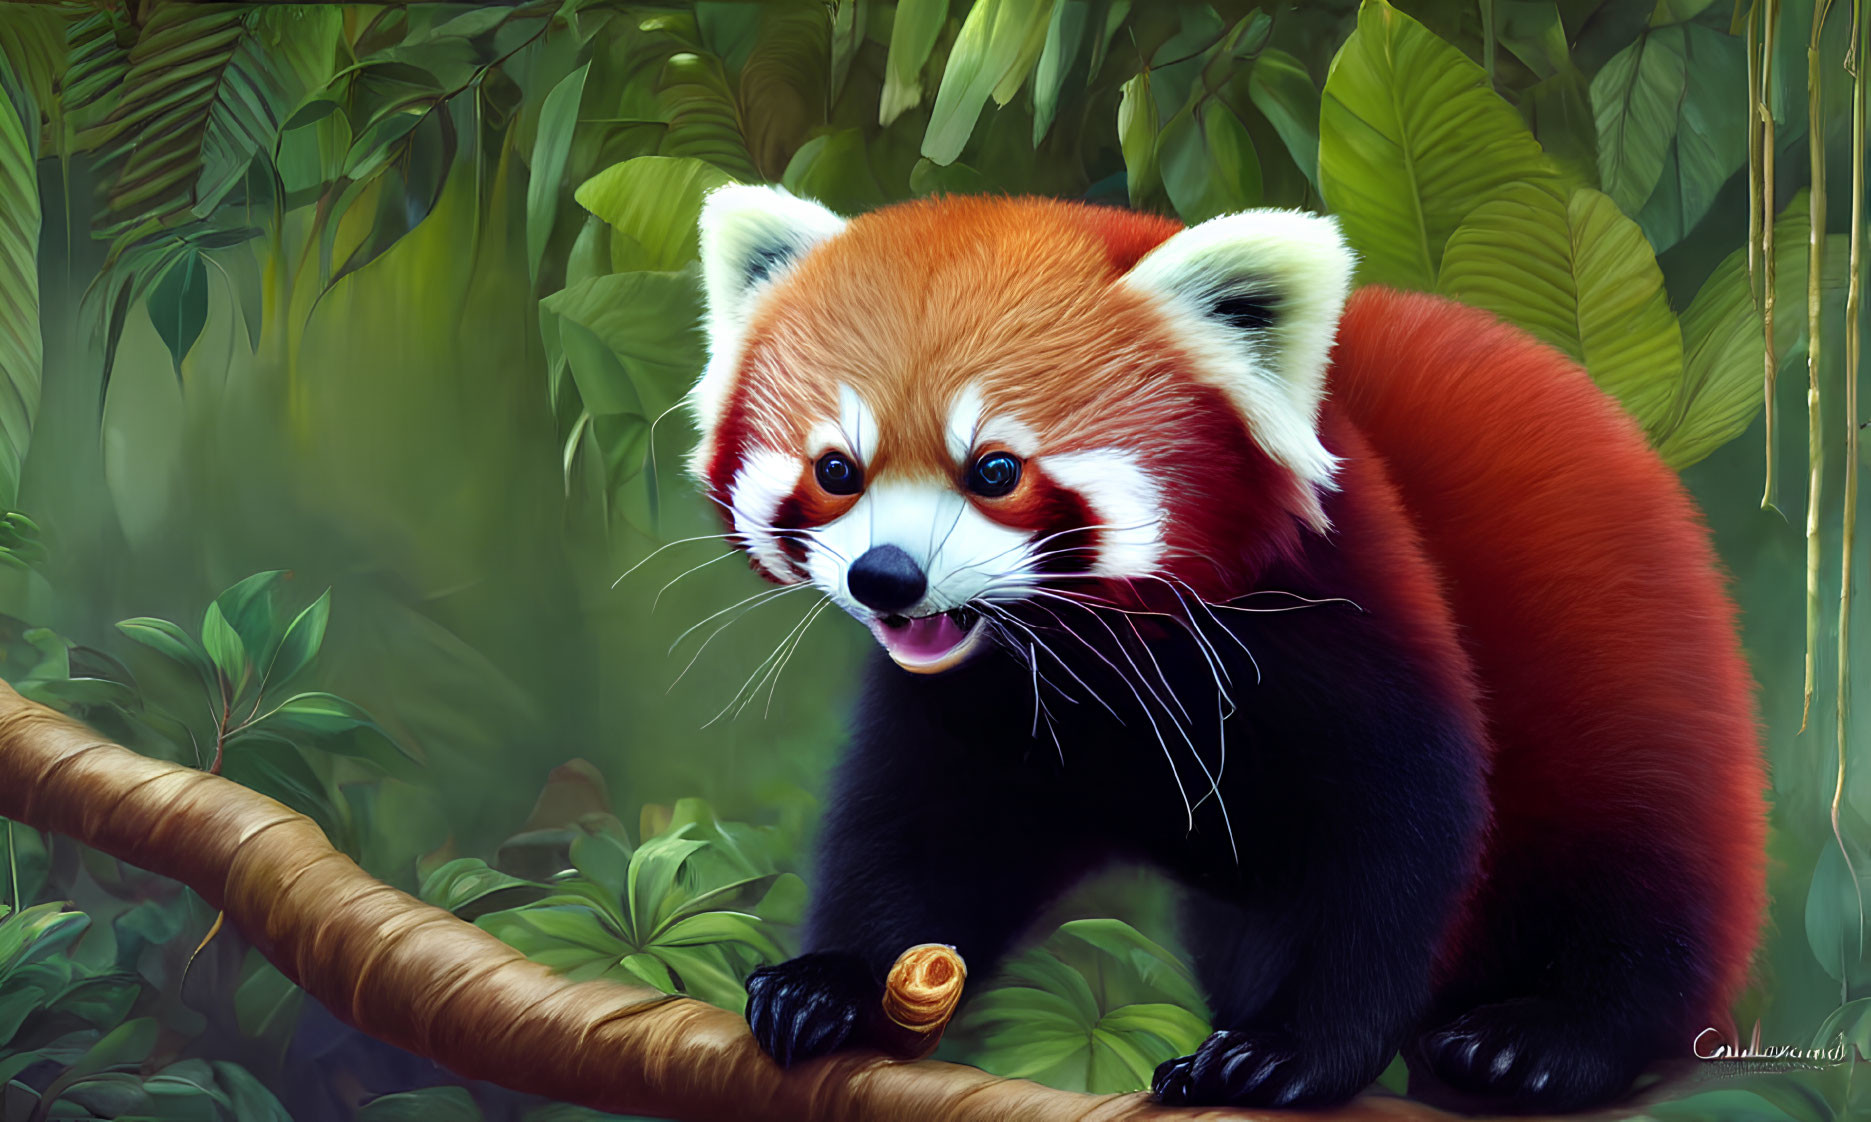 Vivid Red Panda with White Face Balancing on Branch